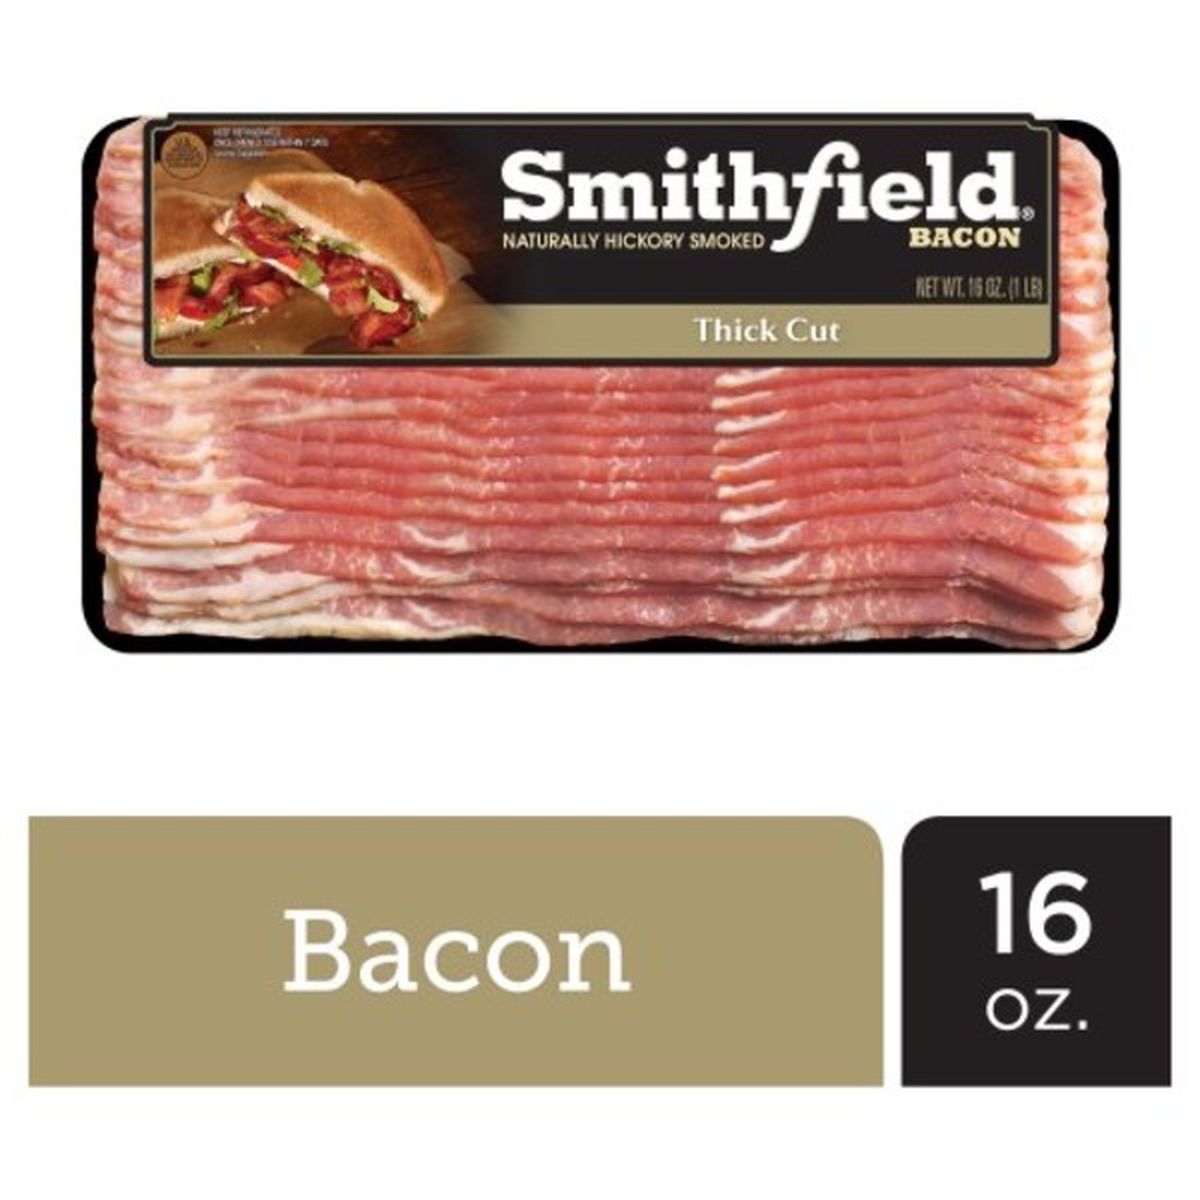 Calories in Smithfield Naturally Hickory Smoked Thick Cut Bacon